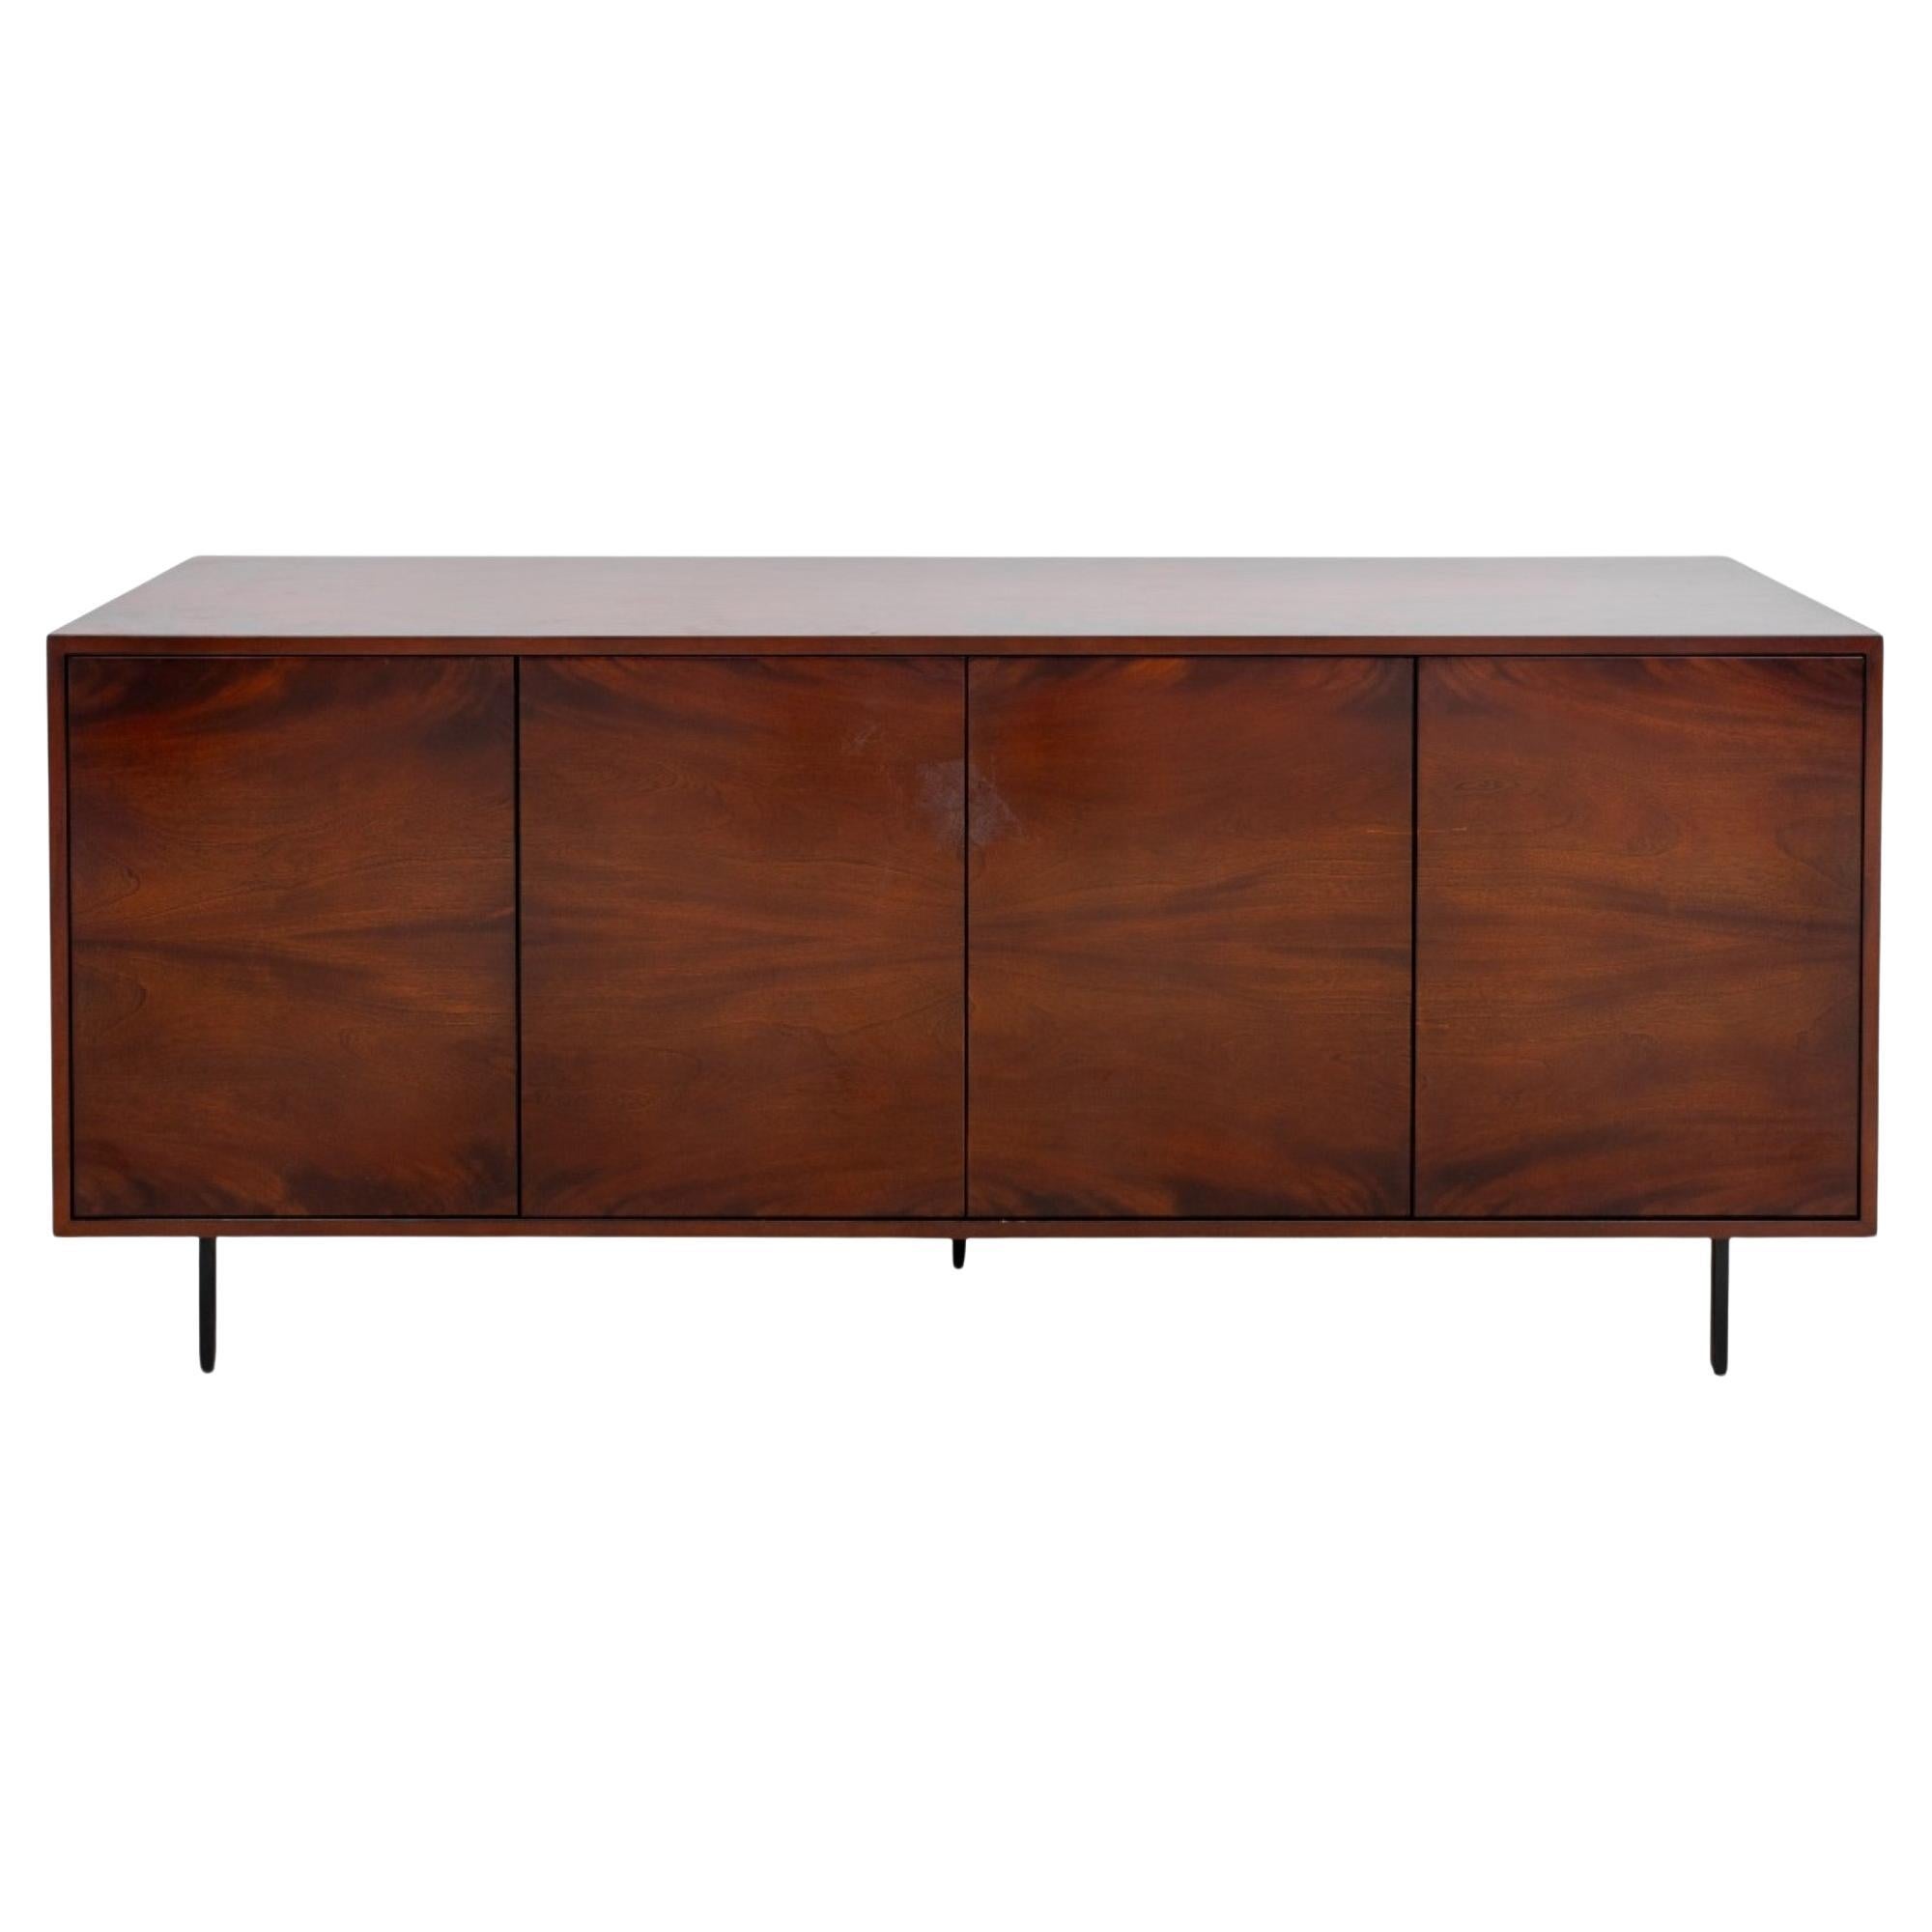 Mid-Century Modern Style Credenza Cabinet For Sale